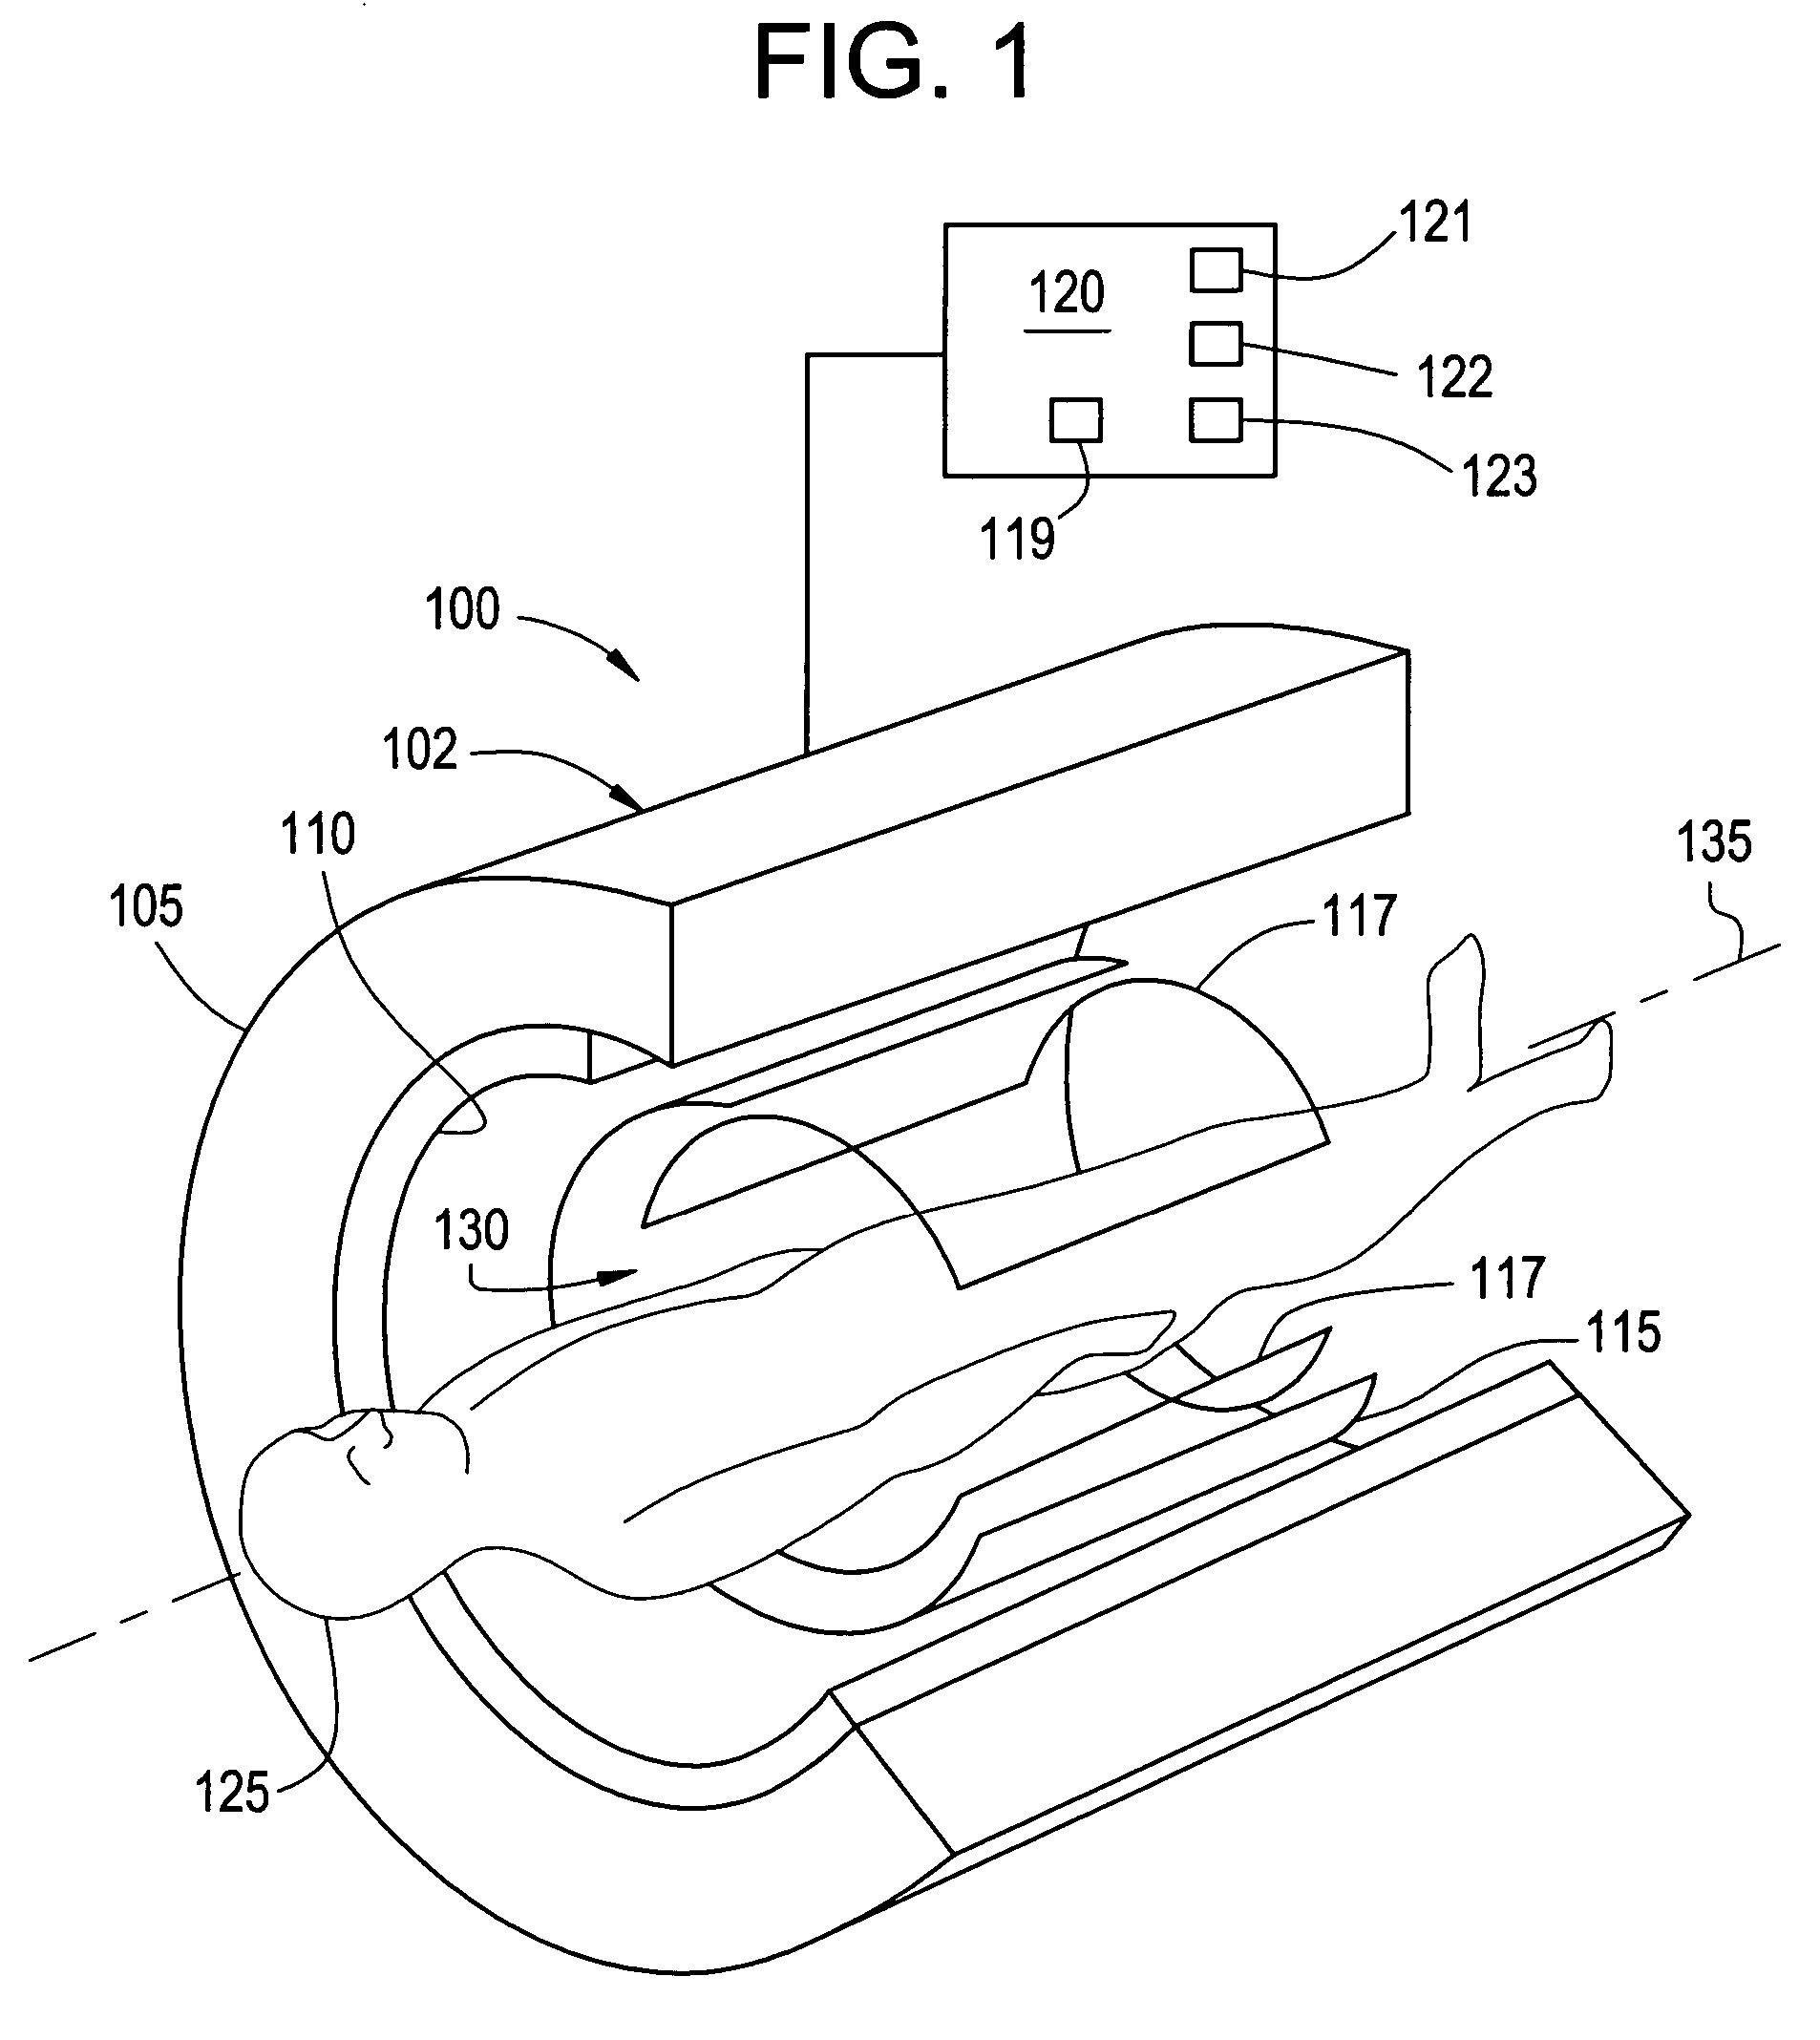 Magnetic field generating apparatus and method for magnetic resonance imaging